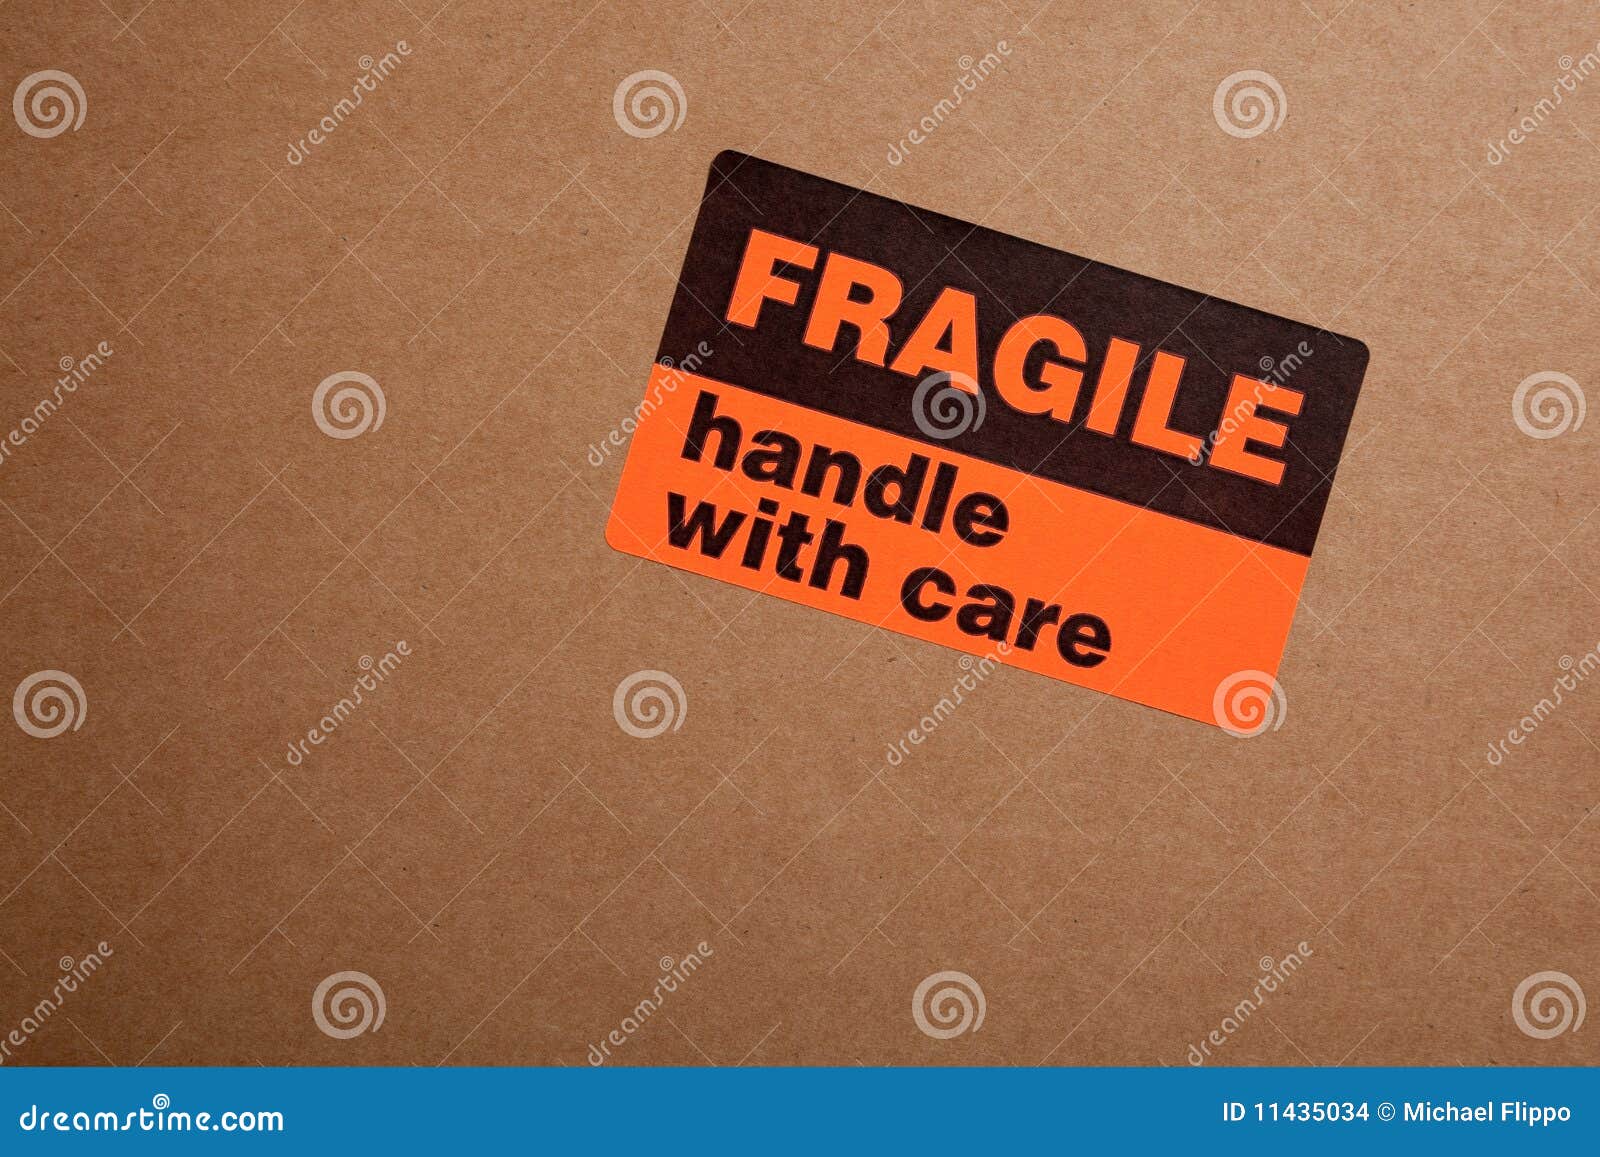 moving boxes with fragile stickers